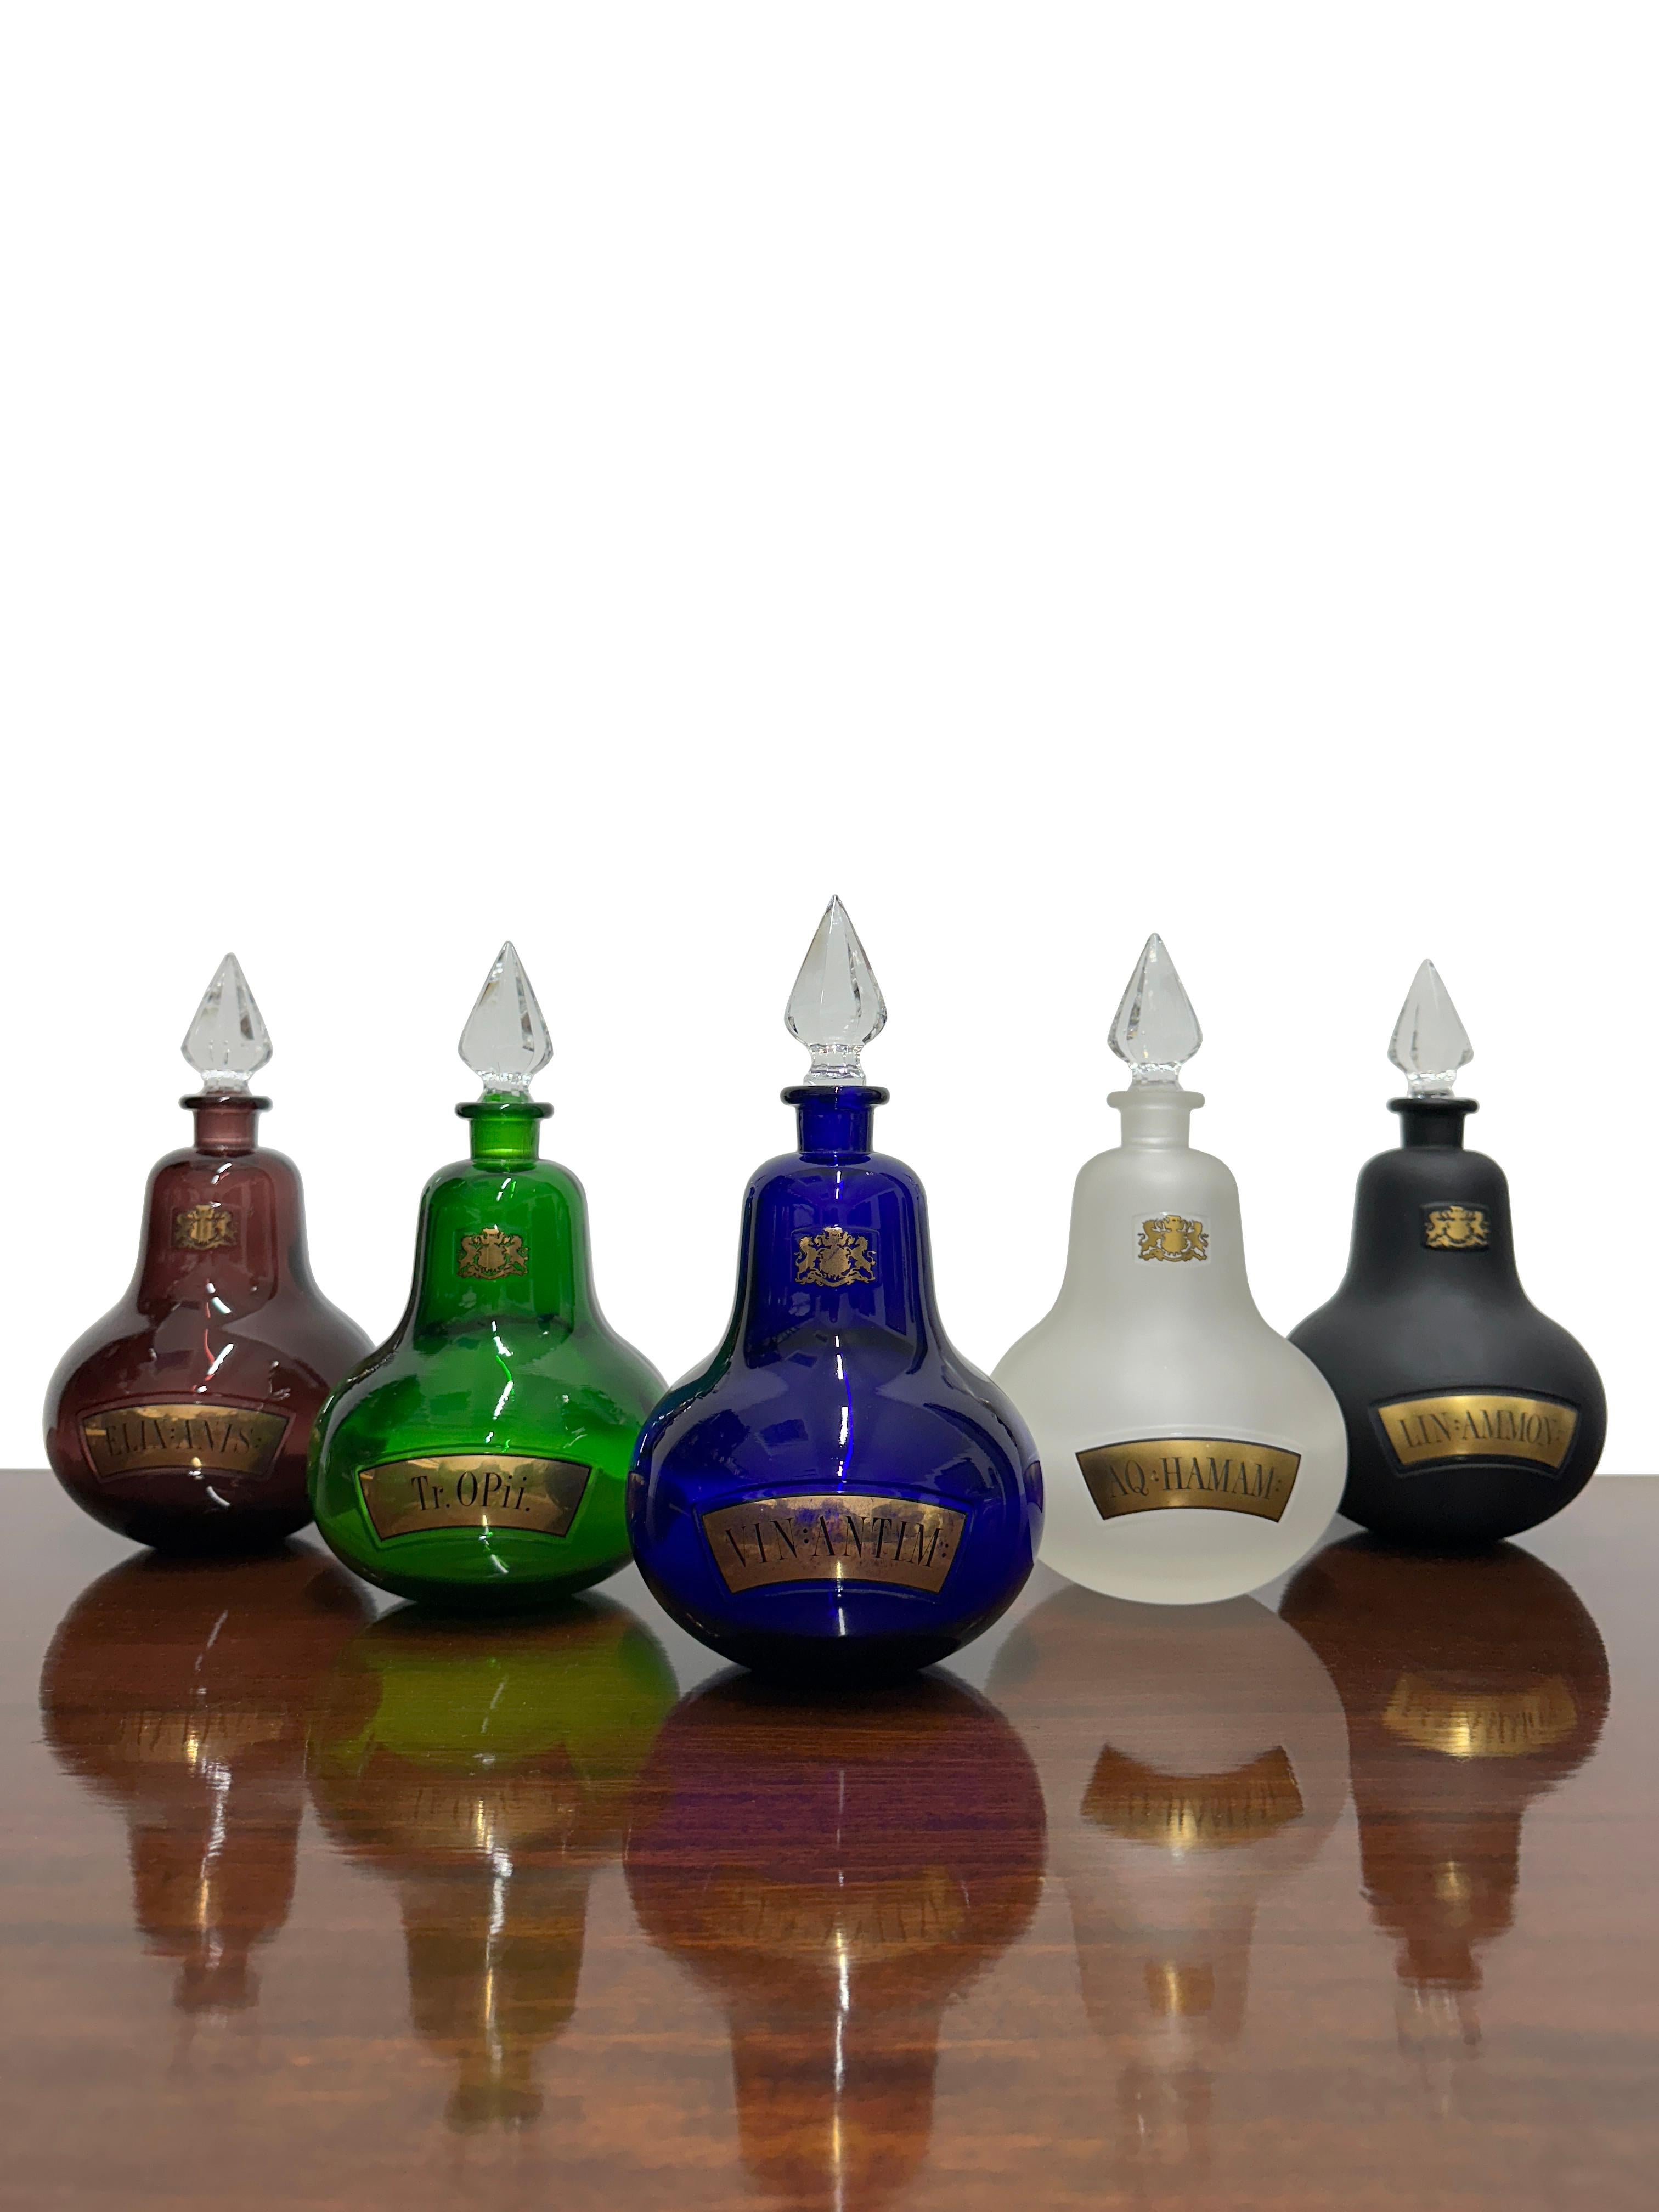 - A rare set of Royal Pharmaceutical Society Collectors Apothecary Bottles, circa 1960.
- There are five bottles in total each of a different colour, each bottle is labeled in Latin with exquisite gold leaf, the Royal Pharmaceutical Society crest